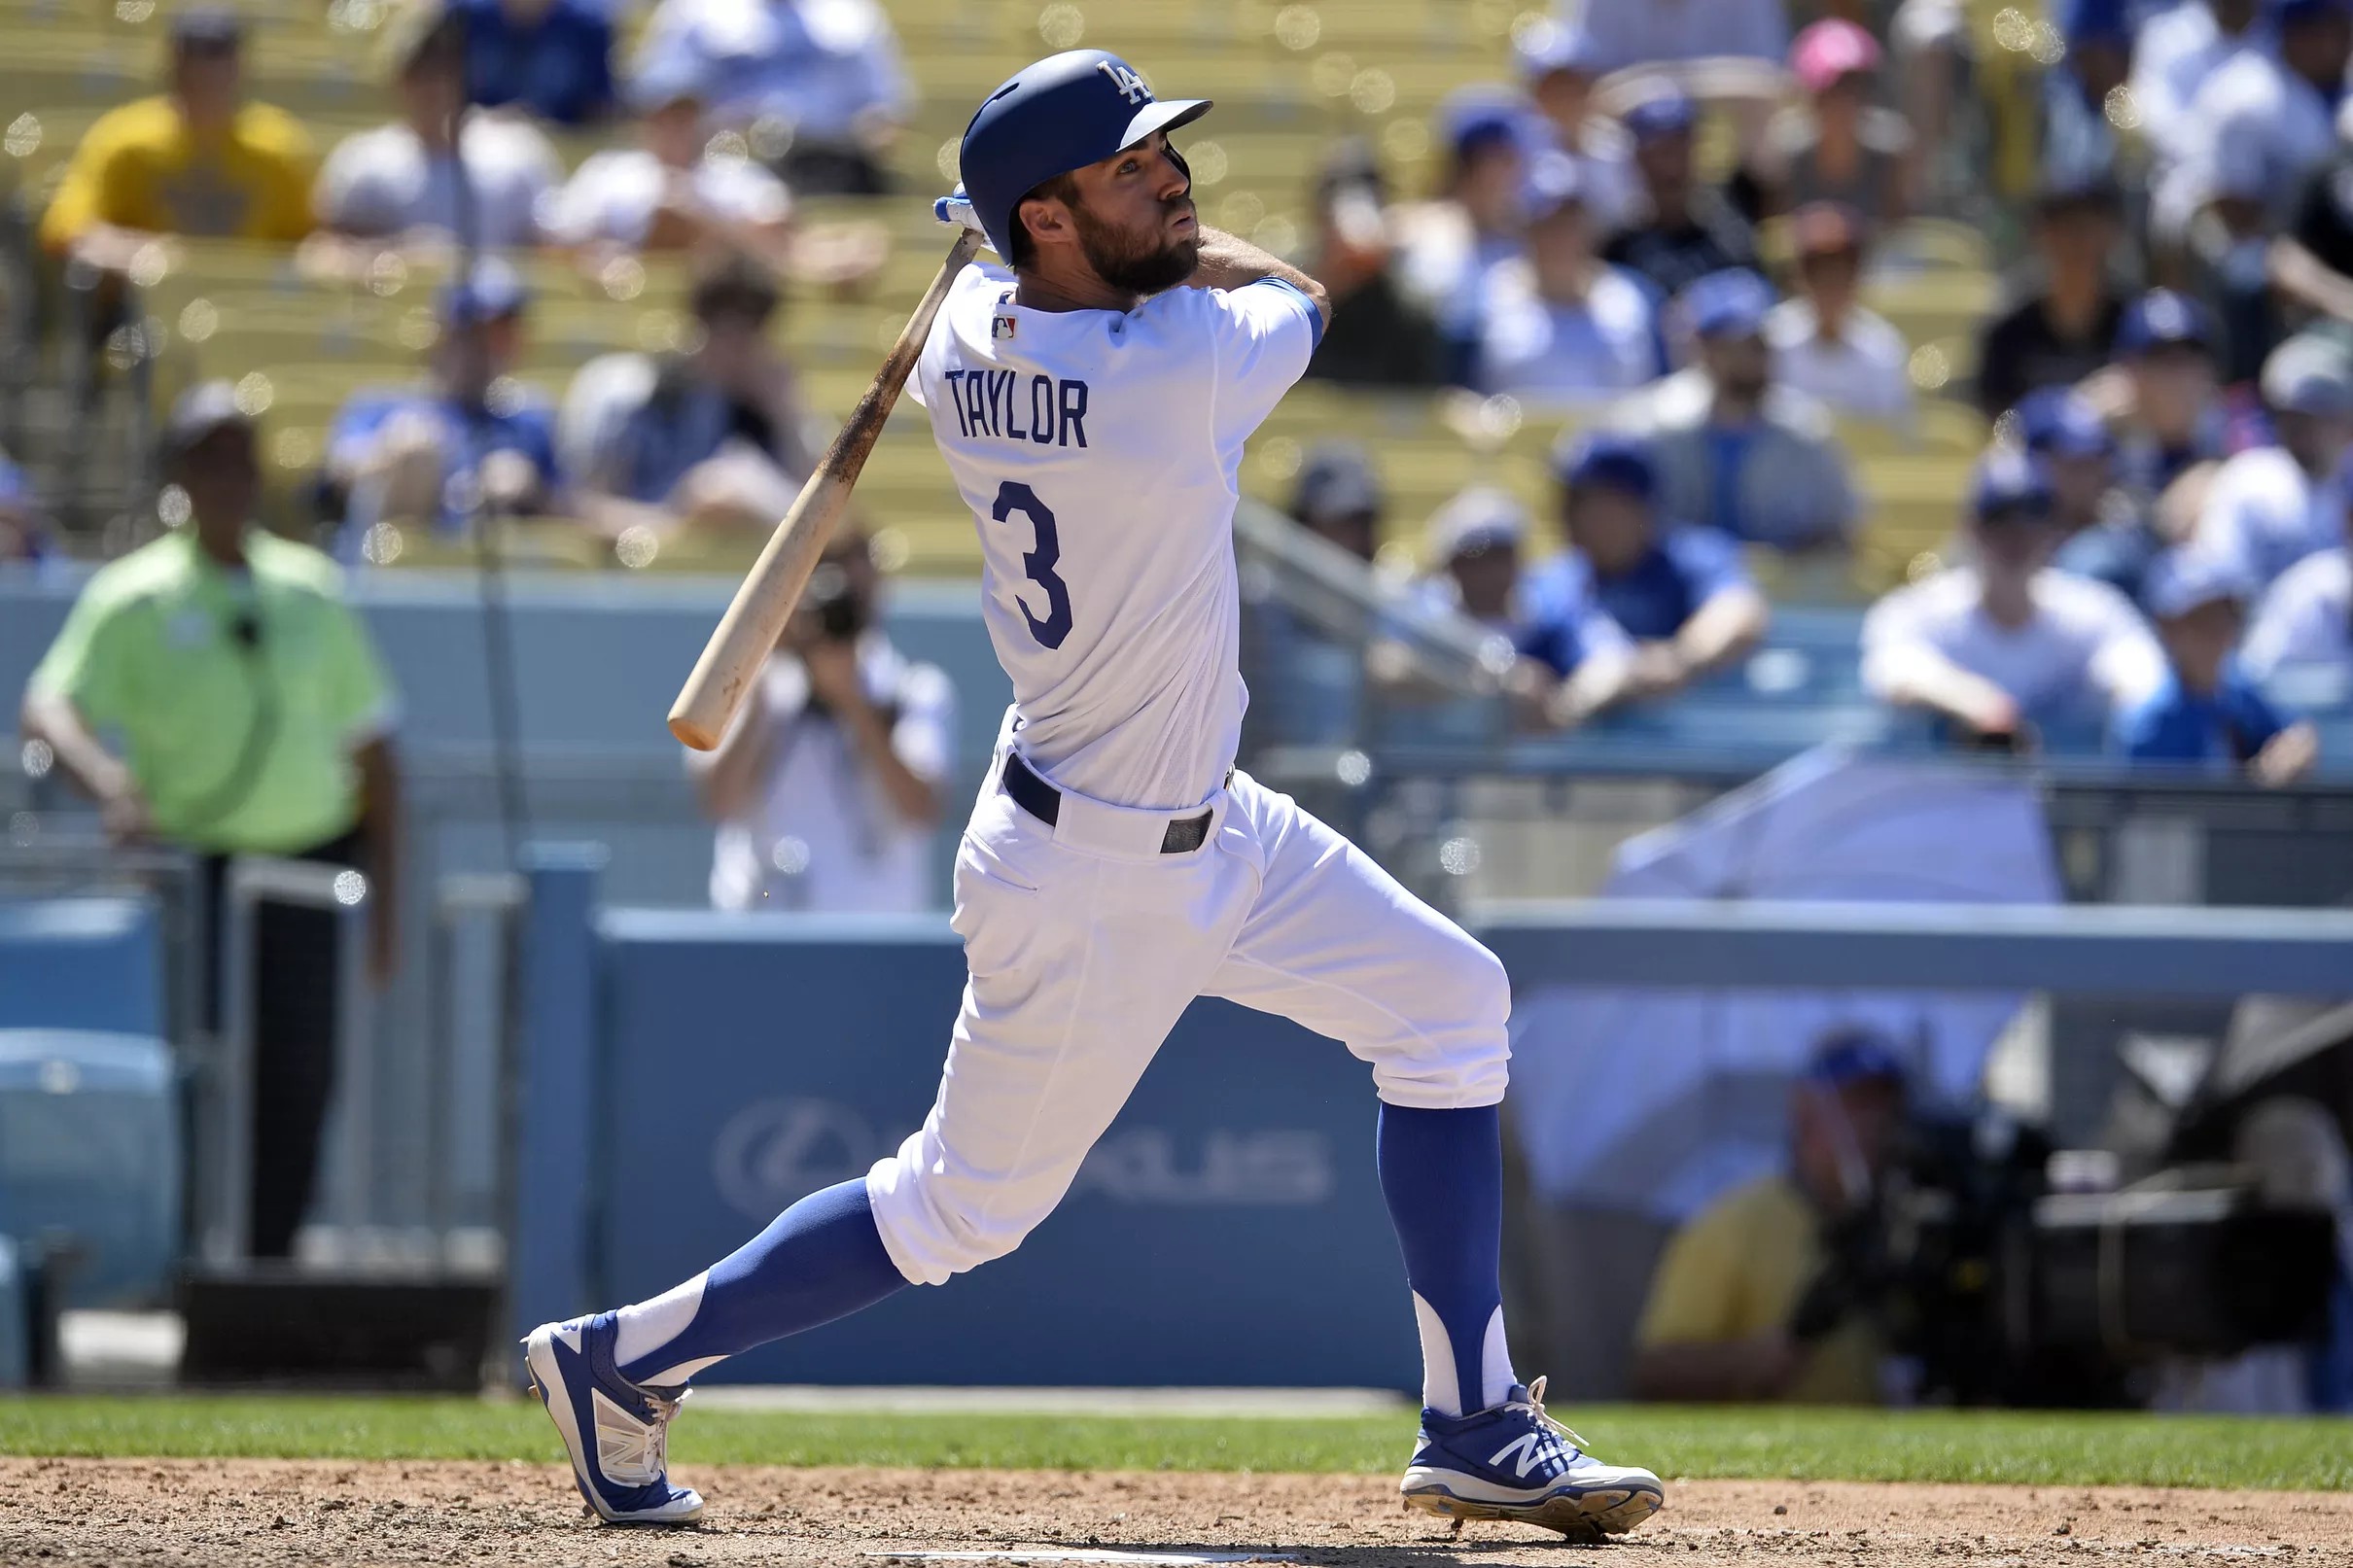 Chris Taylor makes first career OF start